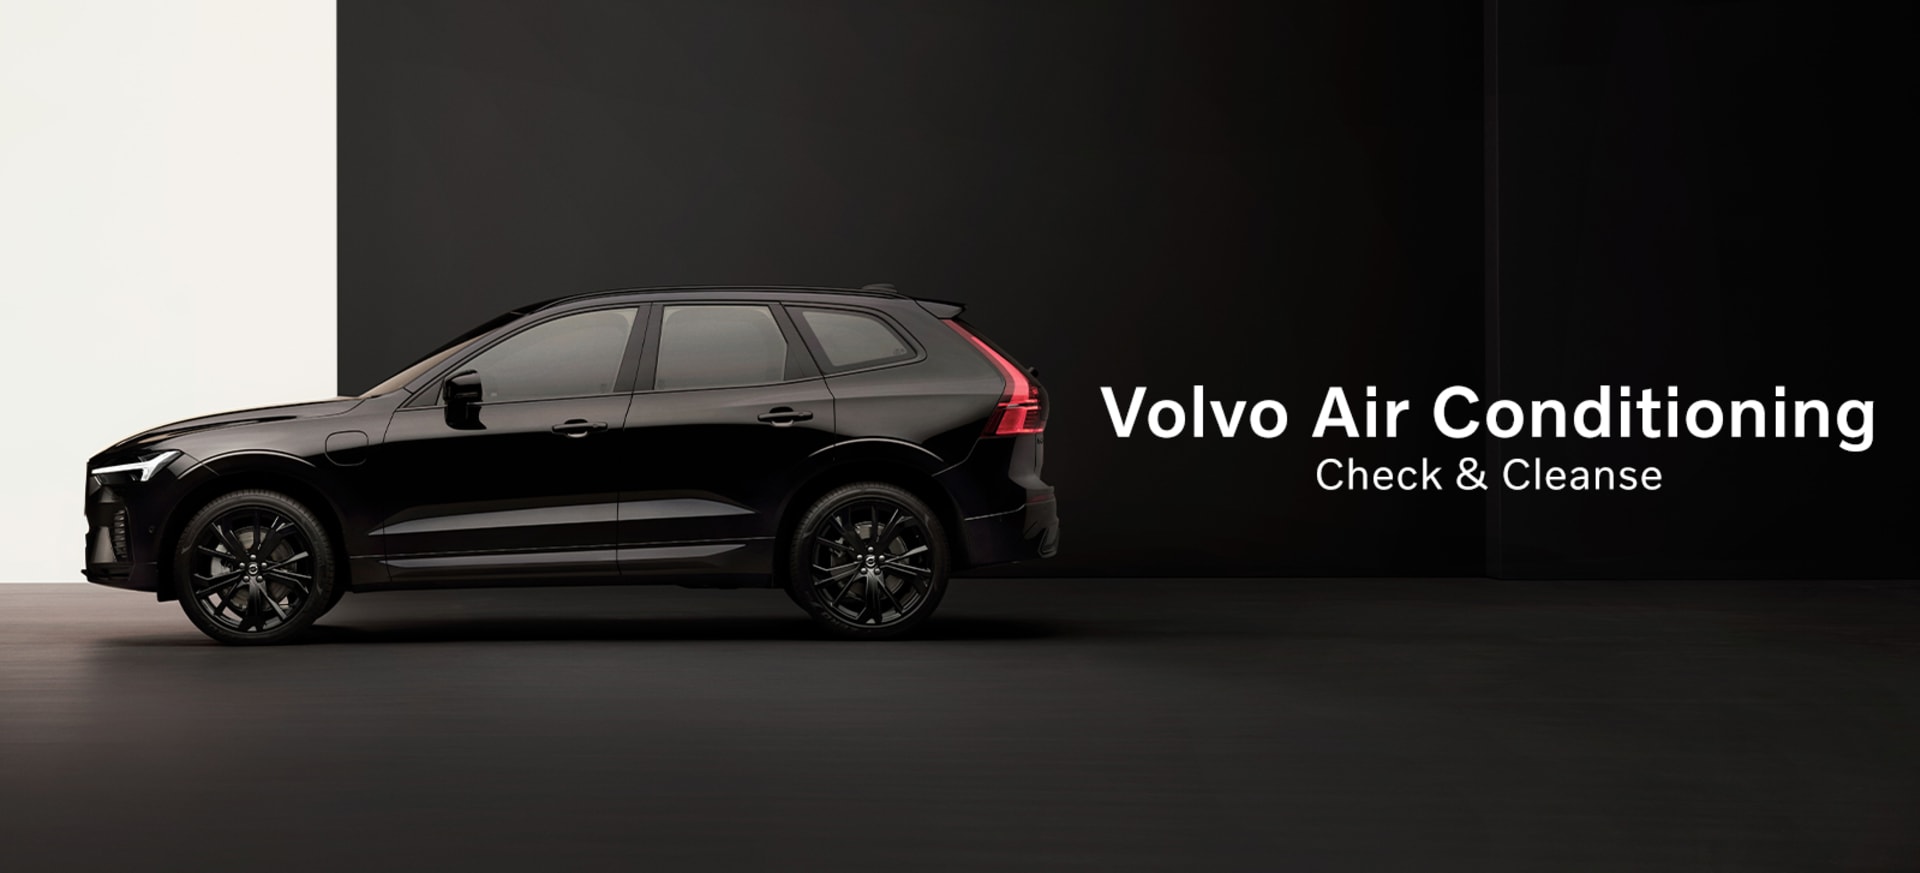 Is your Volvo’s air conditioning ready for the summer heat? 